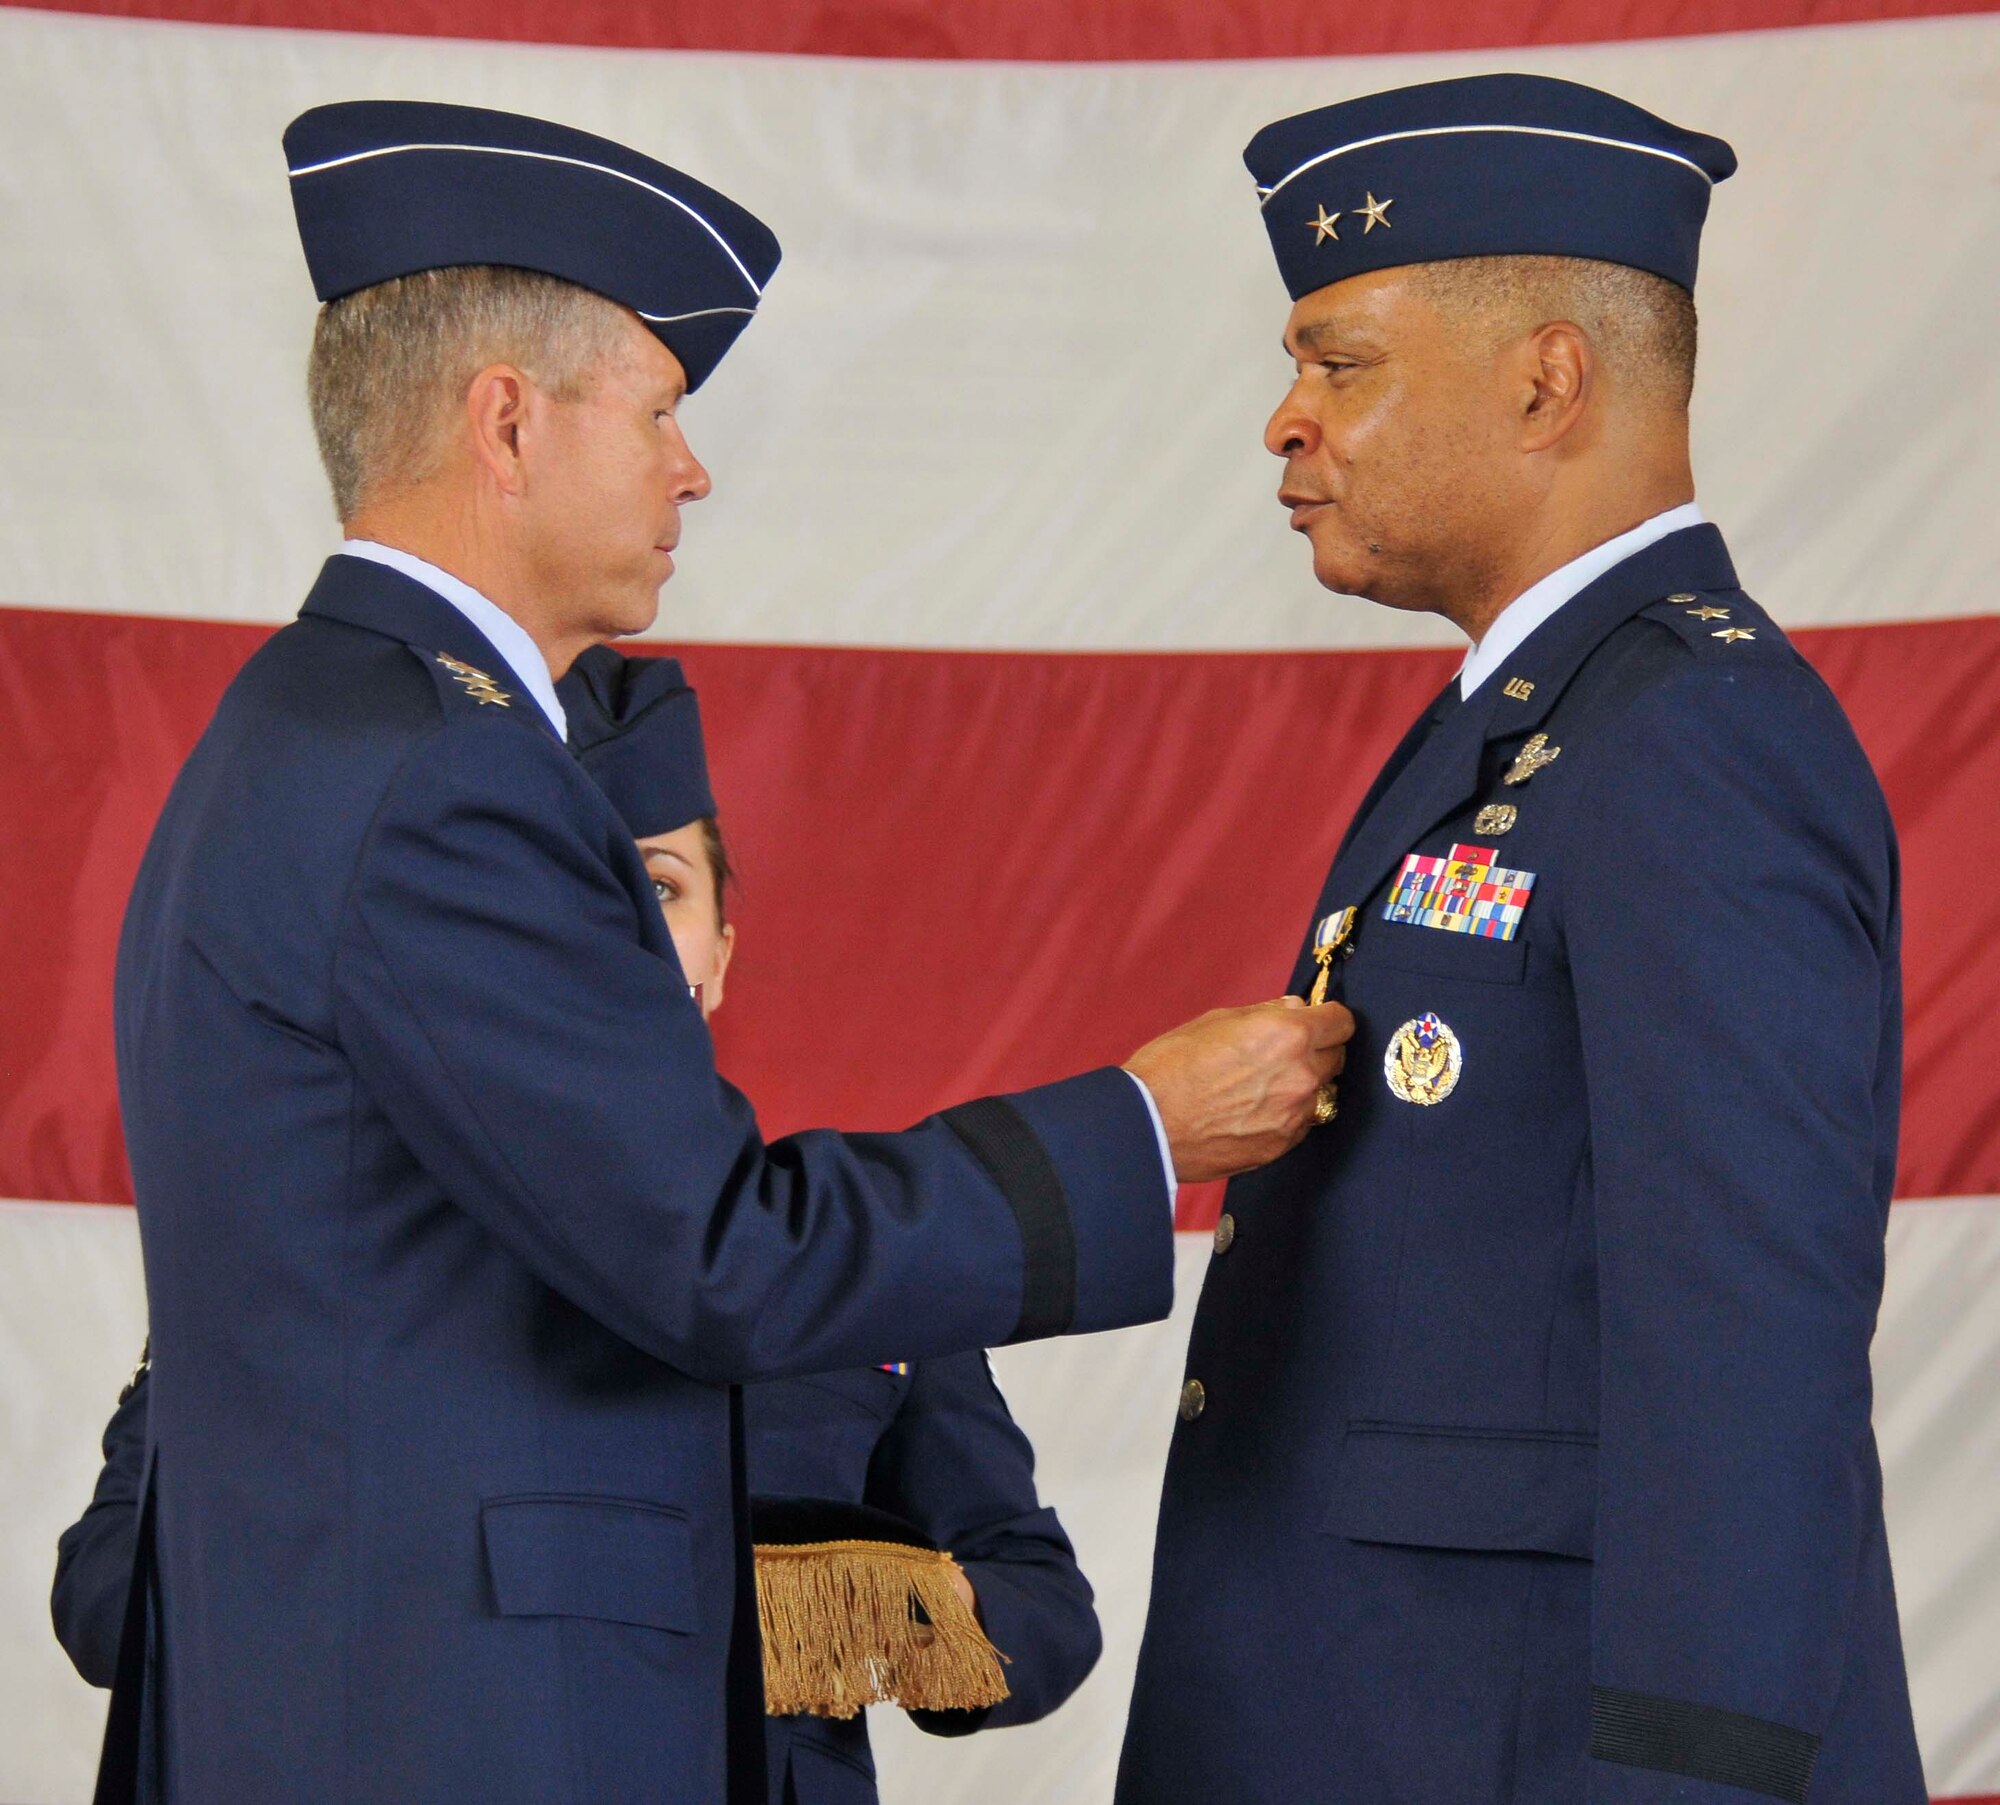 Gen. William M. Fraser, left, Air Combat Command commander, pins a Distinguished Service Medal on Maj. Gen. Garry C. Dean during the Continental U.S. North American Aerospace Defense Command Region-1st Air Force (Air Forces Northern) change of command ceremony at Tyndall Air Force Base, Fla., Aug. 31. Dean relinquished command of CONR-1st AF (AFNORTH) to Lt. Gen. Sid Clarke, marking the first time a lieutenant general has ever held a command billet at Tyndall. (U.S. Air Force photo by Lisa Norman)